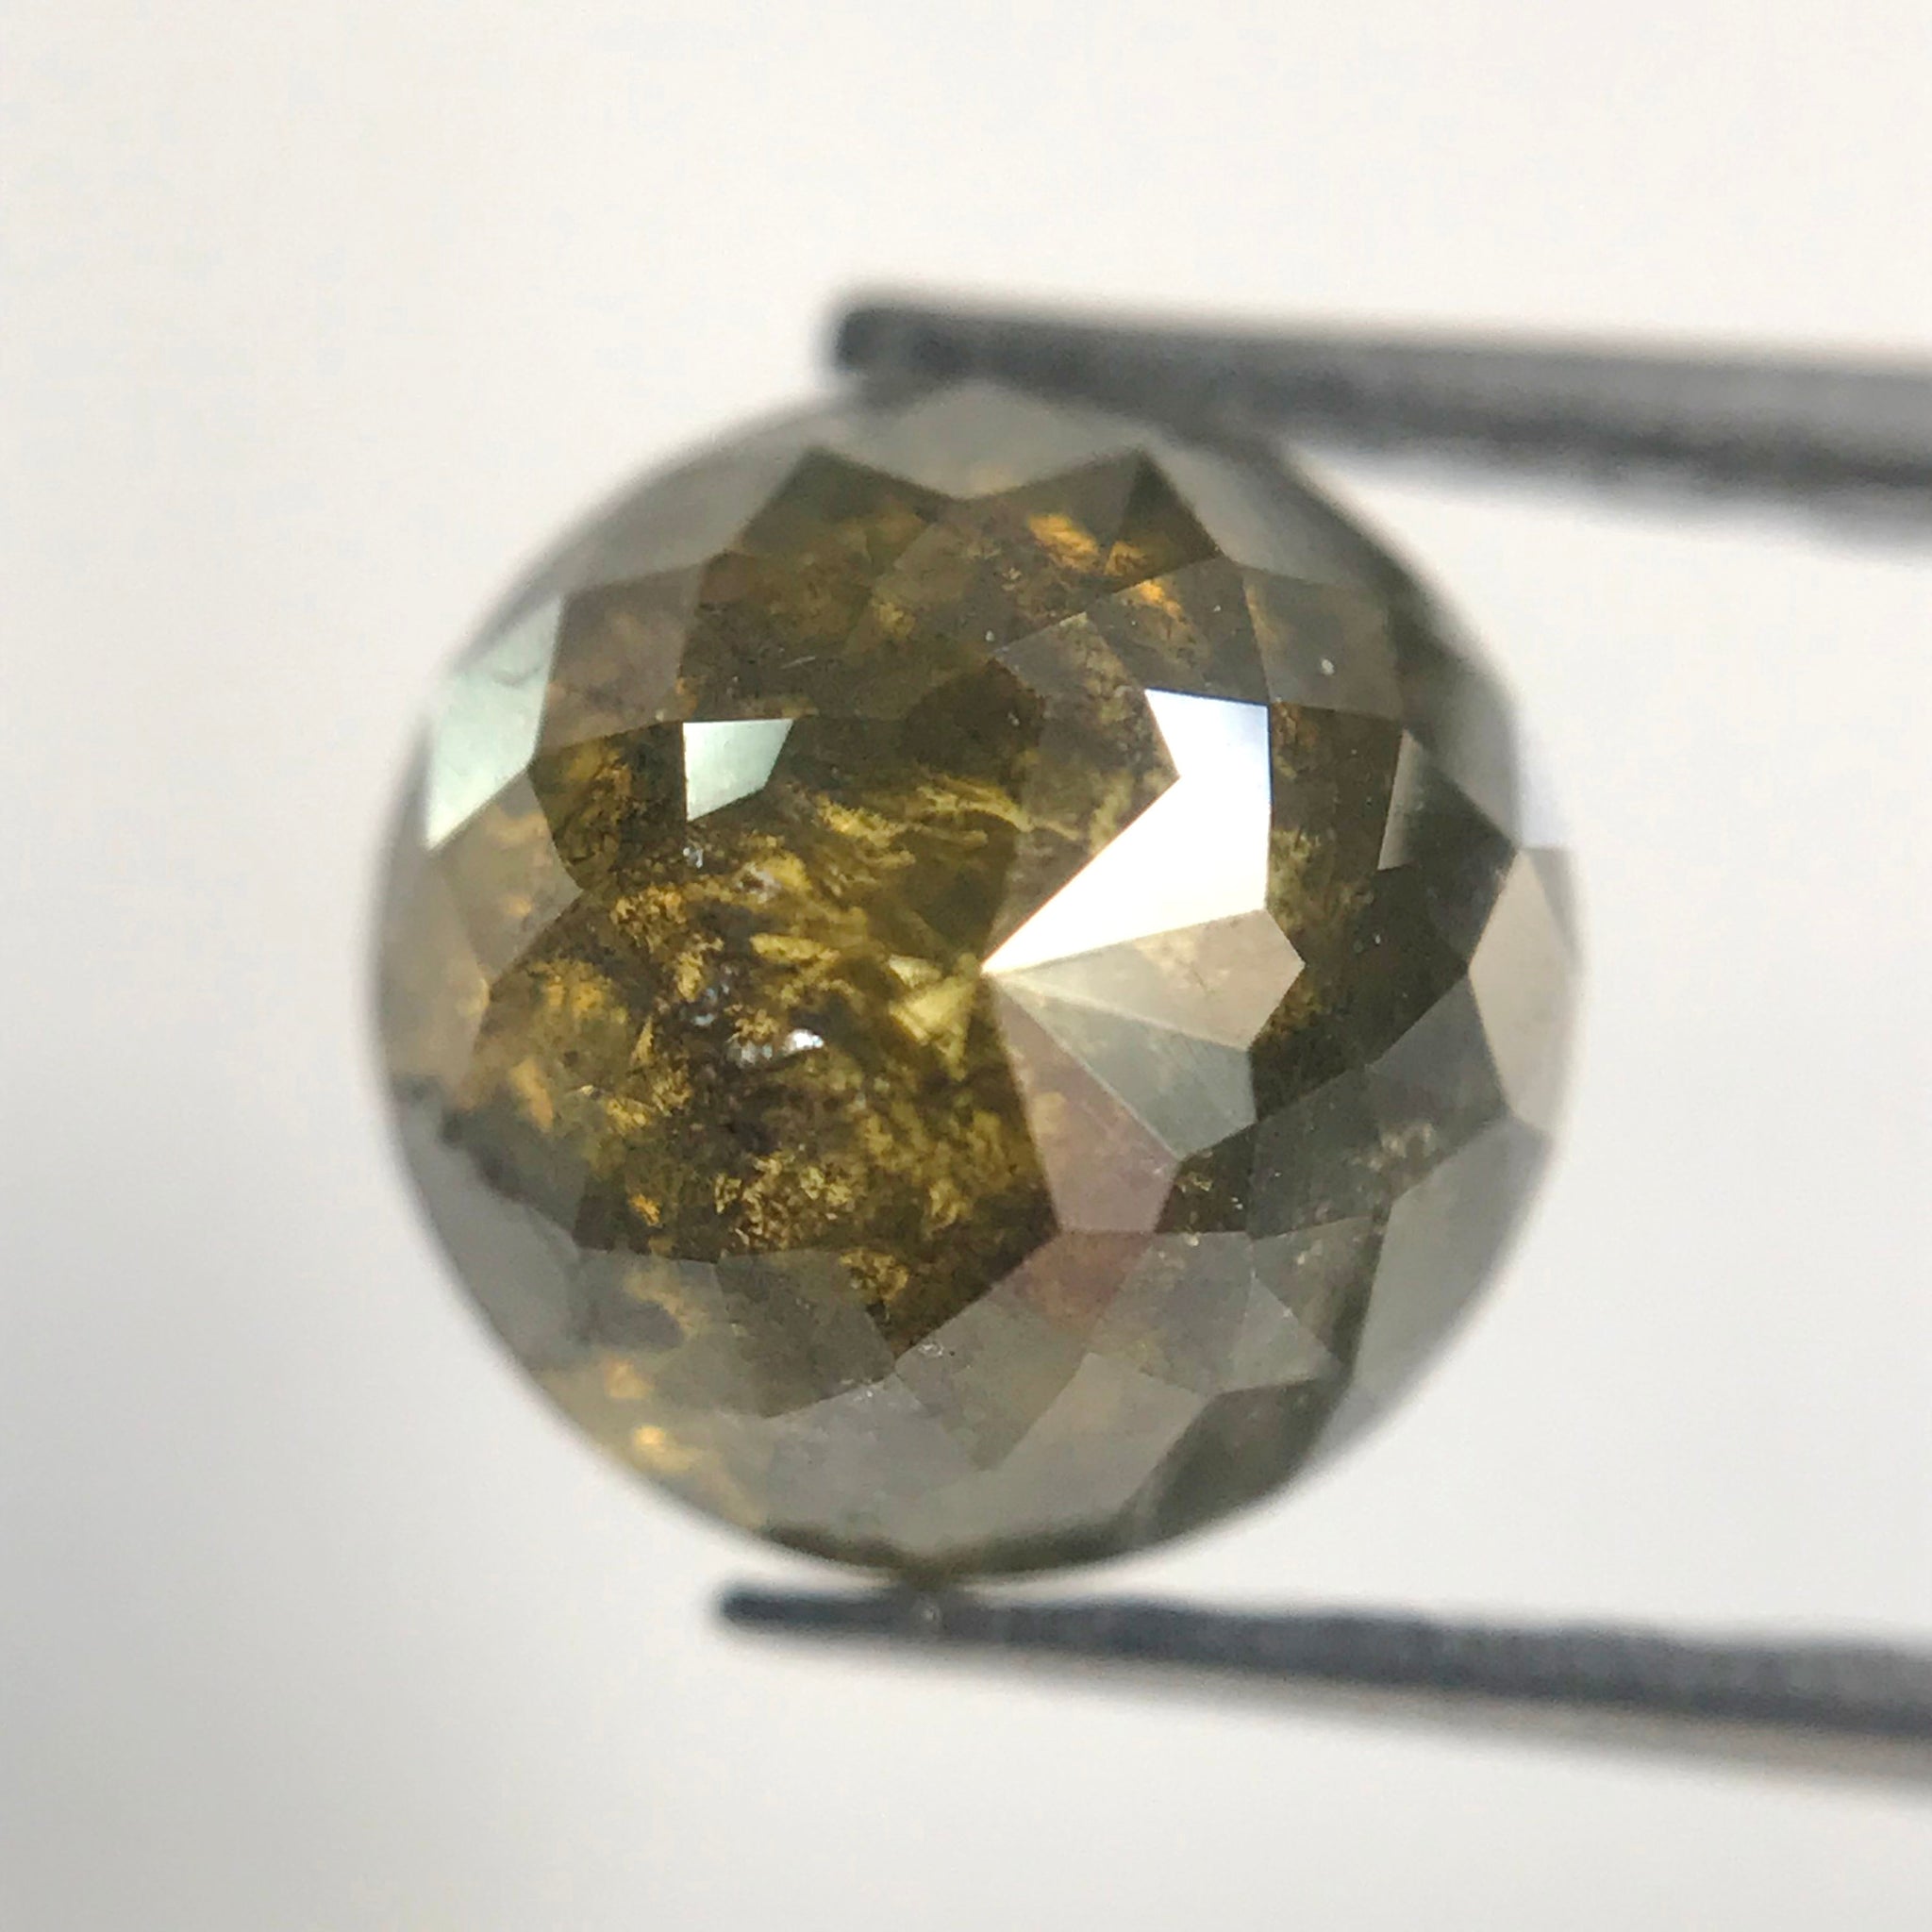 1.13 Ct 5.83 mm X 3.87 mm Natural Loose Diamond Greenish Grey color Salt and Pepper Round Rose Cut Loose Diamond Use for Jewelry SJ06/30